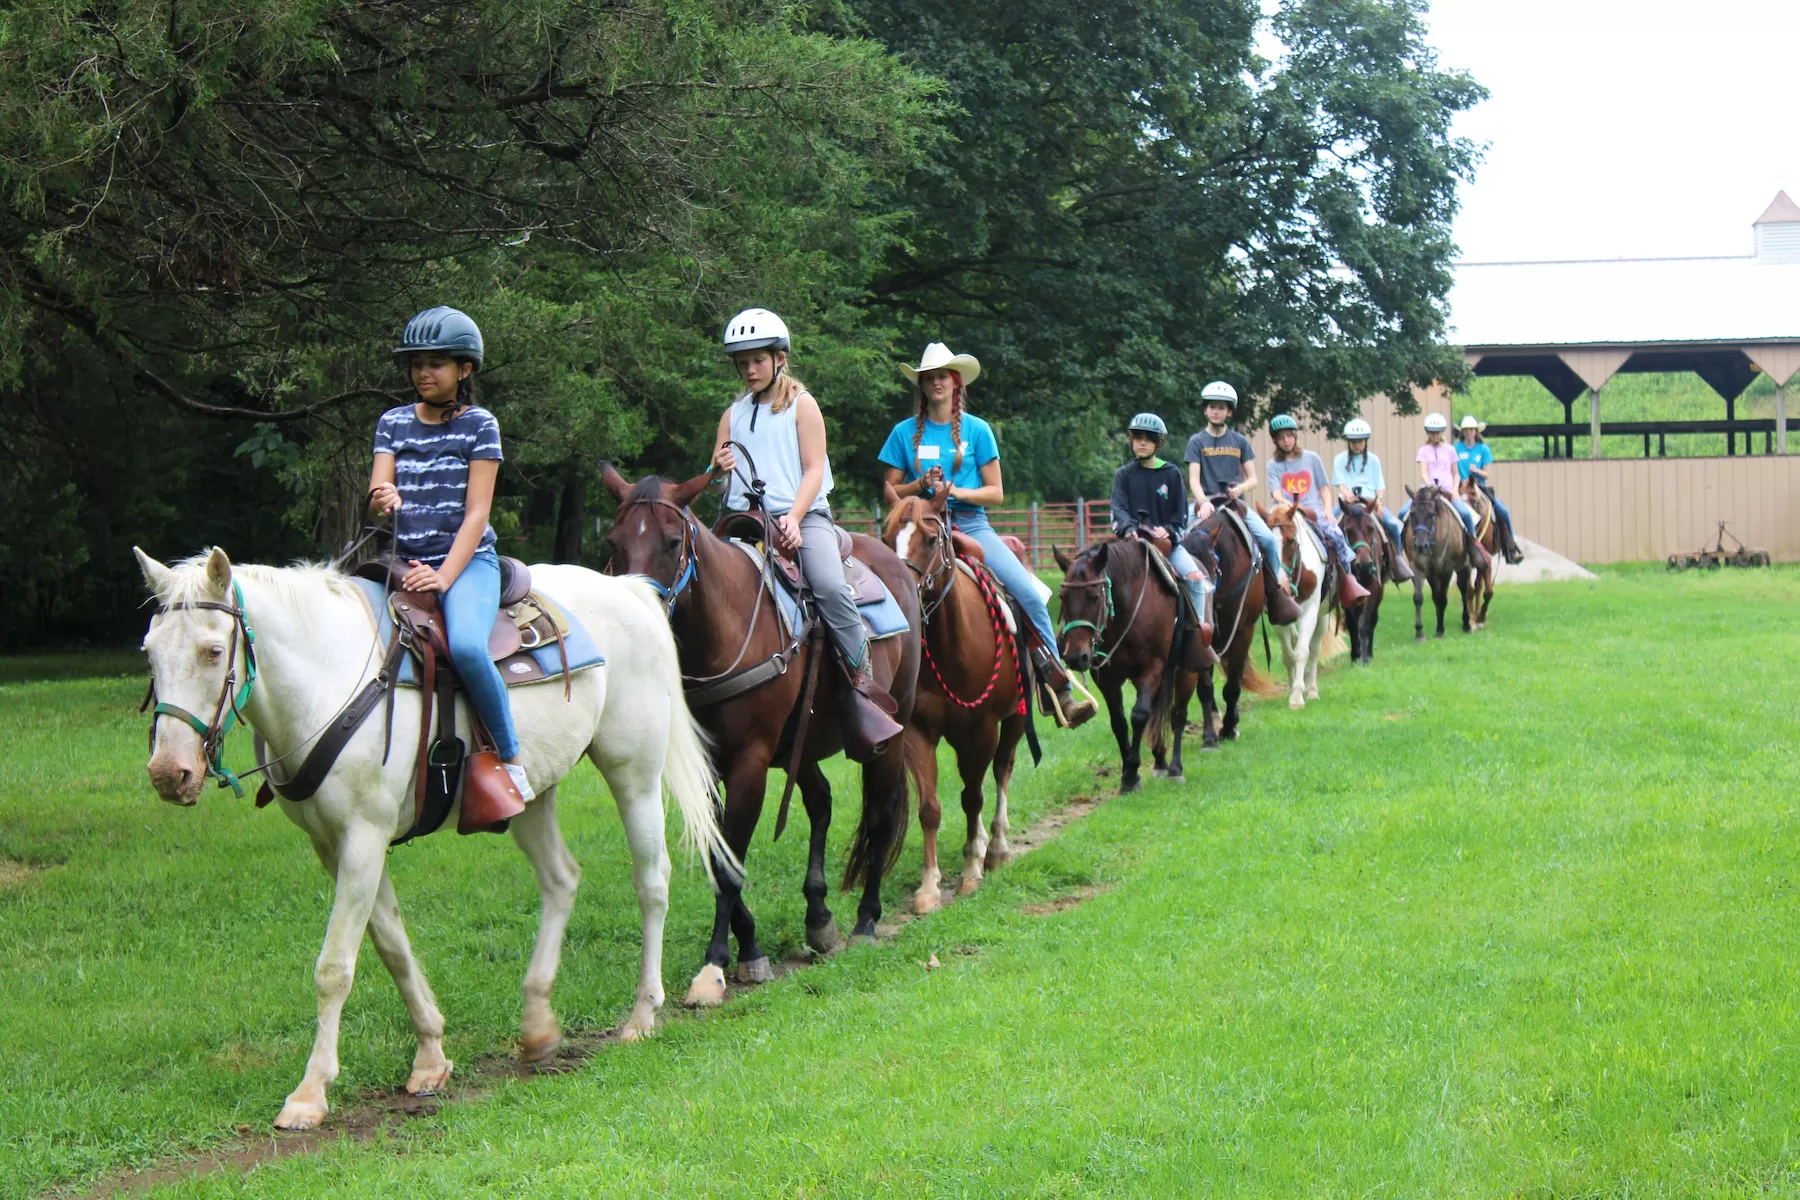 campers at ymca camp lakewood equestrian camp riding horses on trail